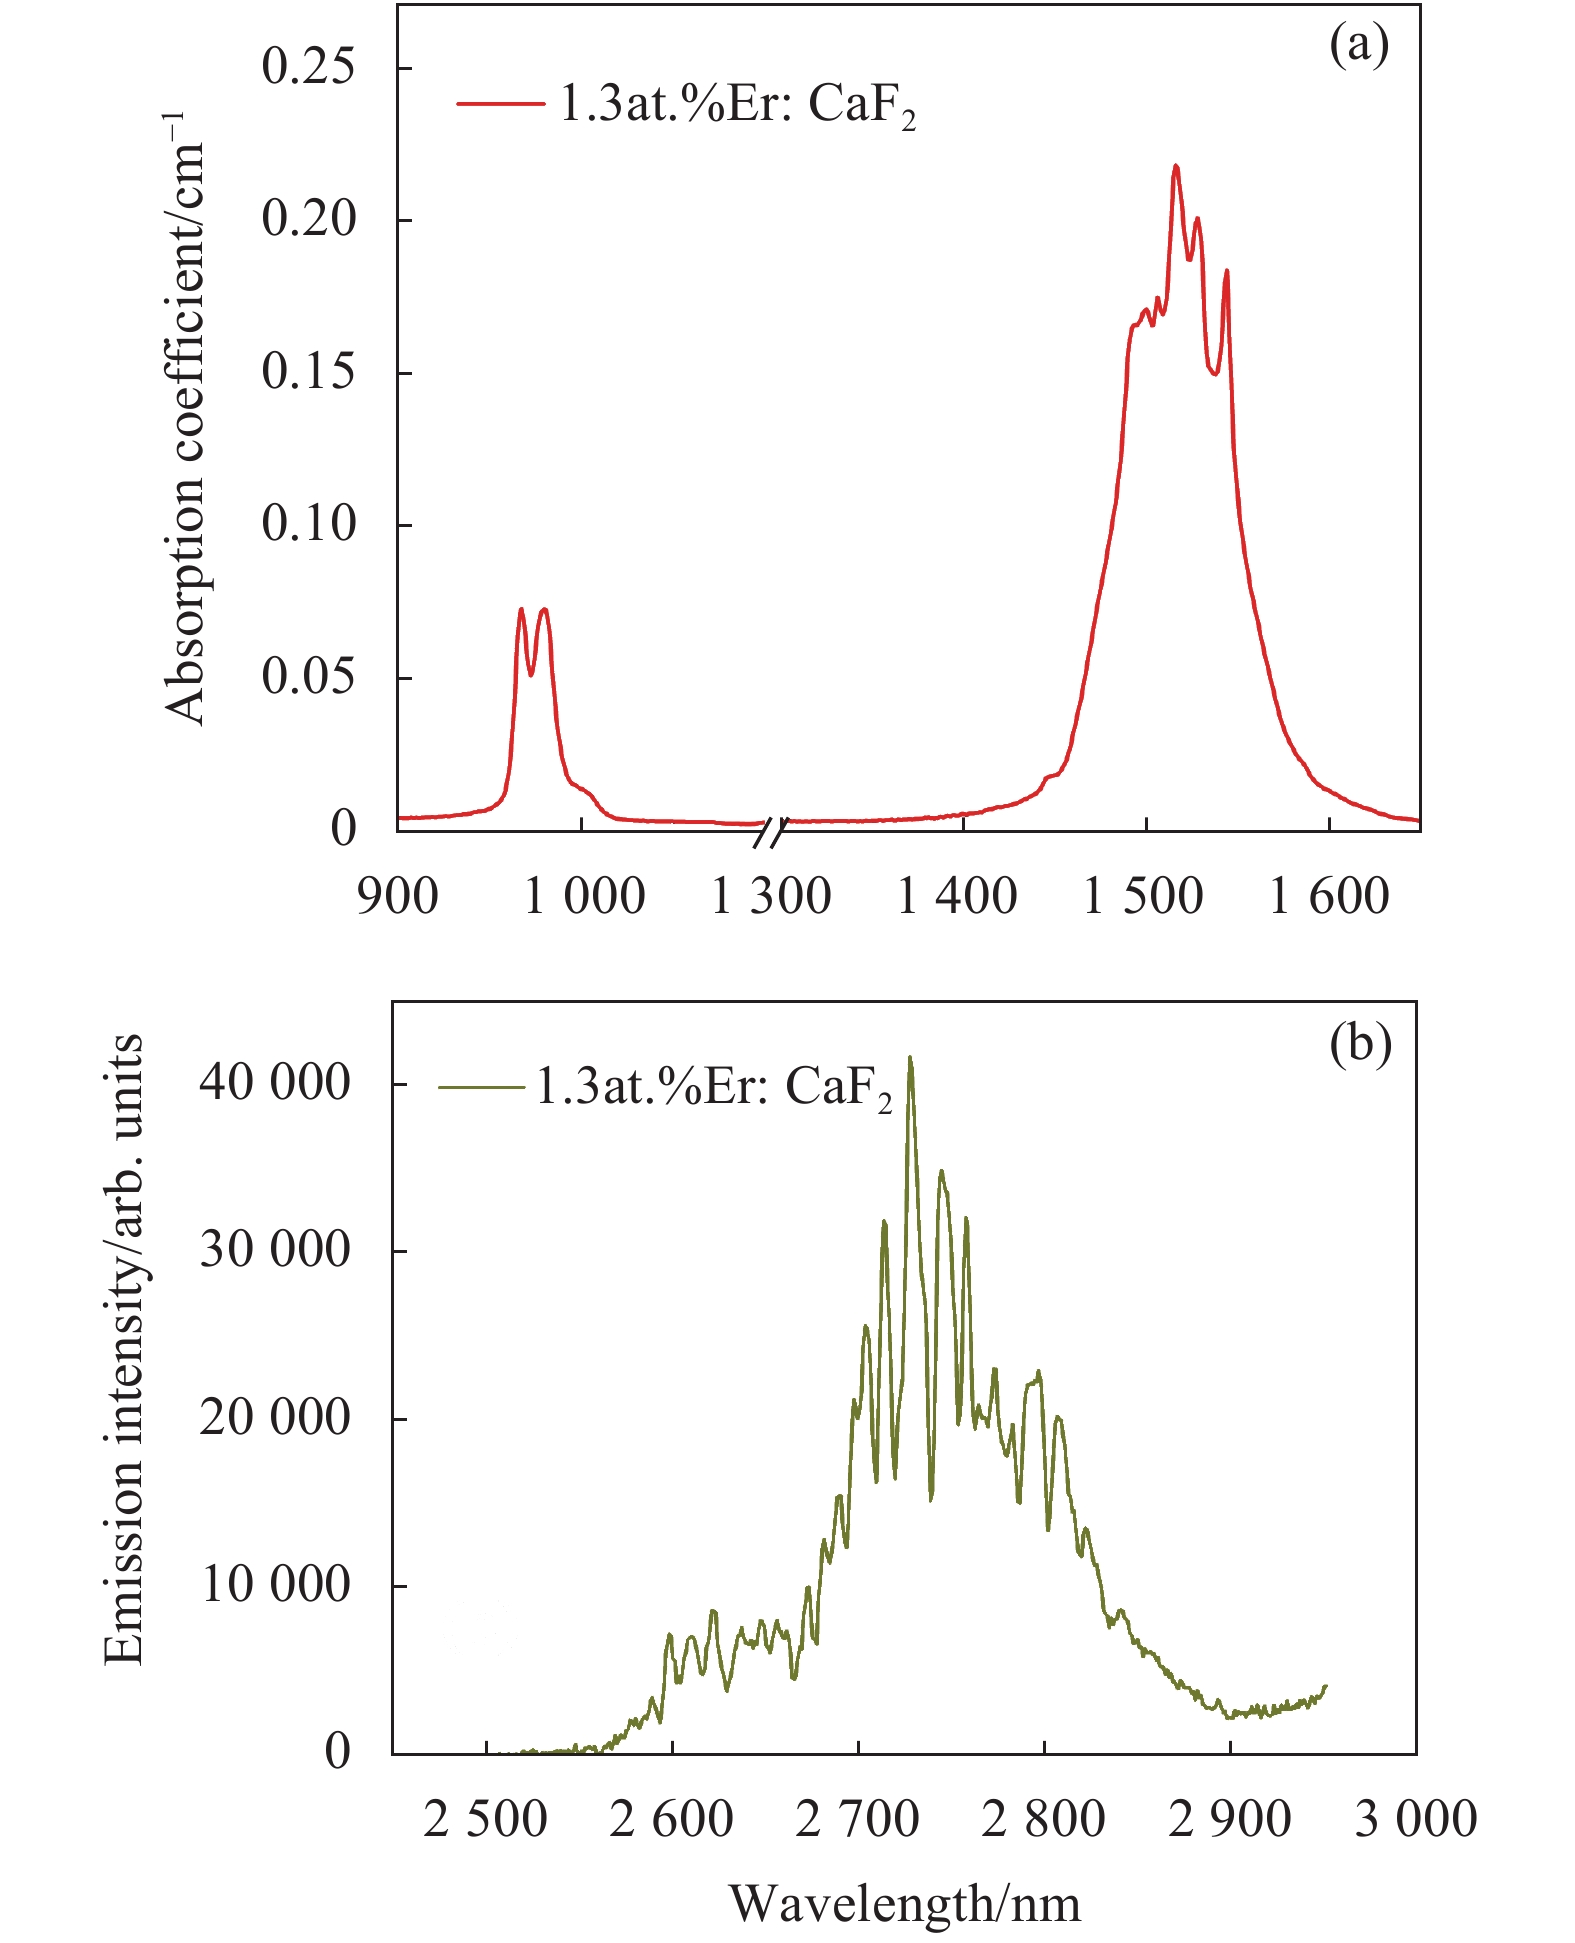 (a) Room temperature absorption coefficient and (b) fluorescence spectrum of 1.3at.% Er3+:CaF2